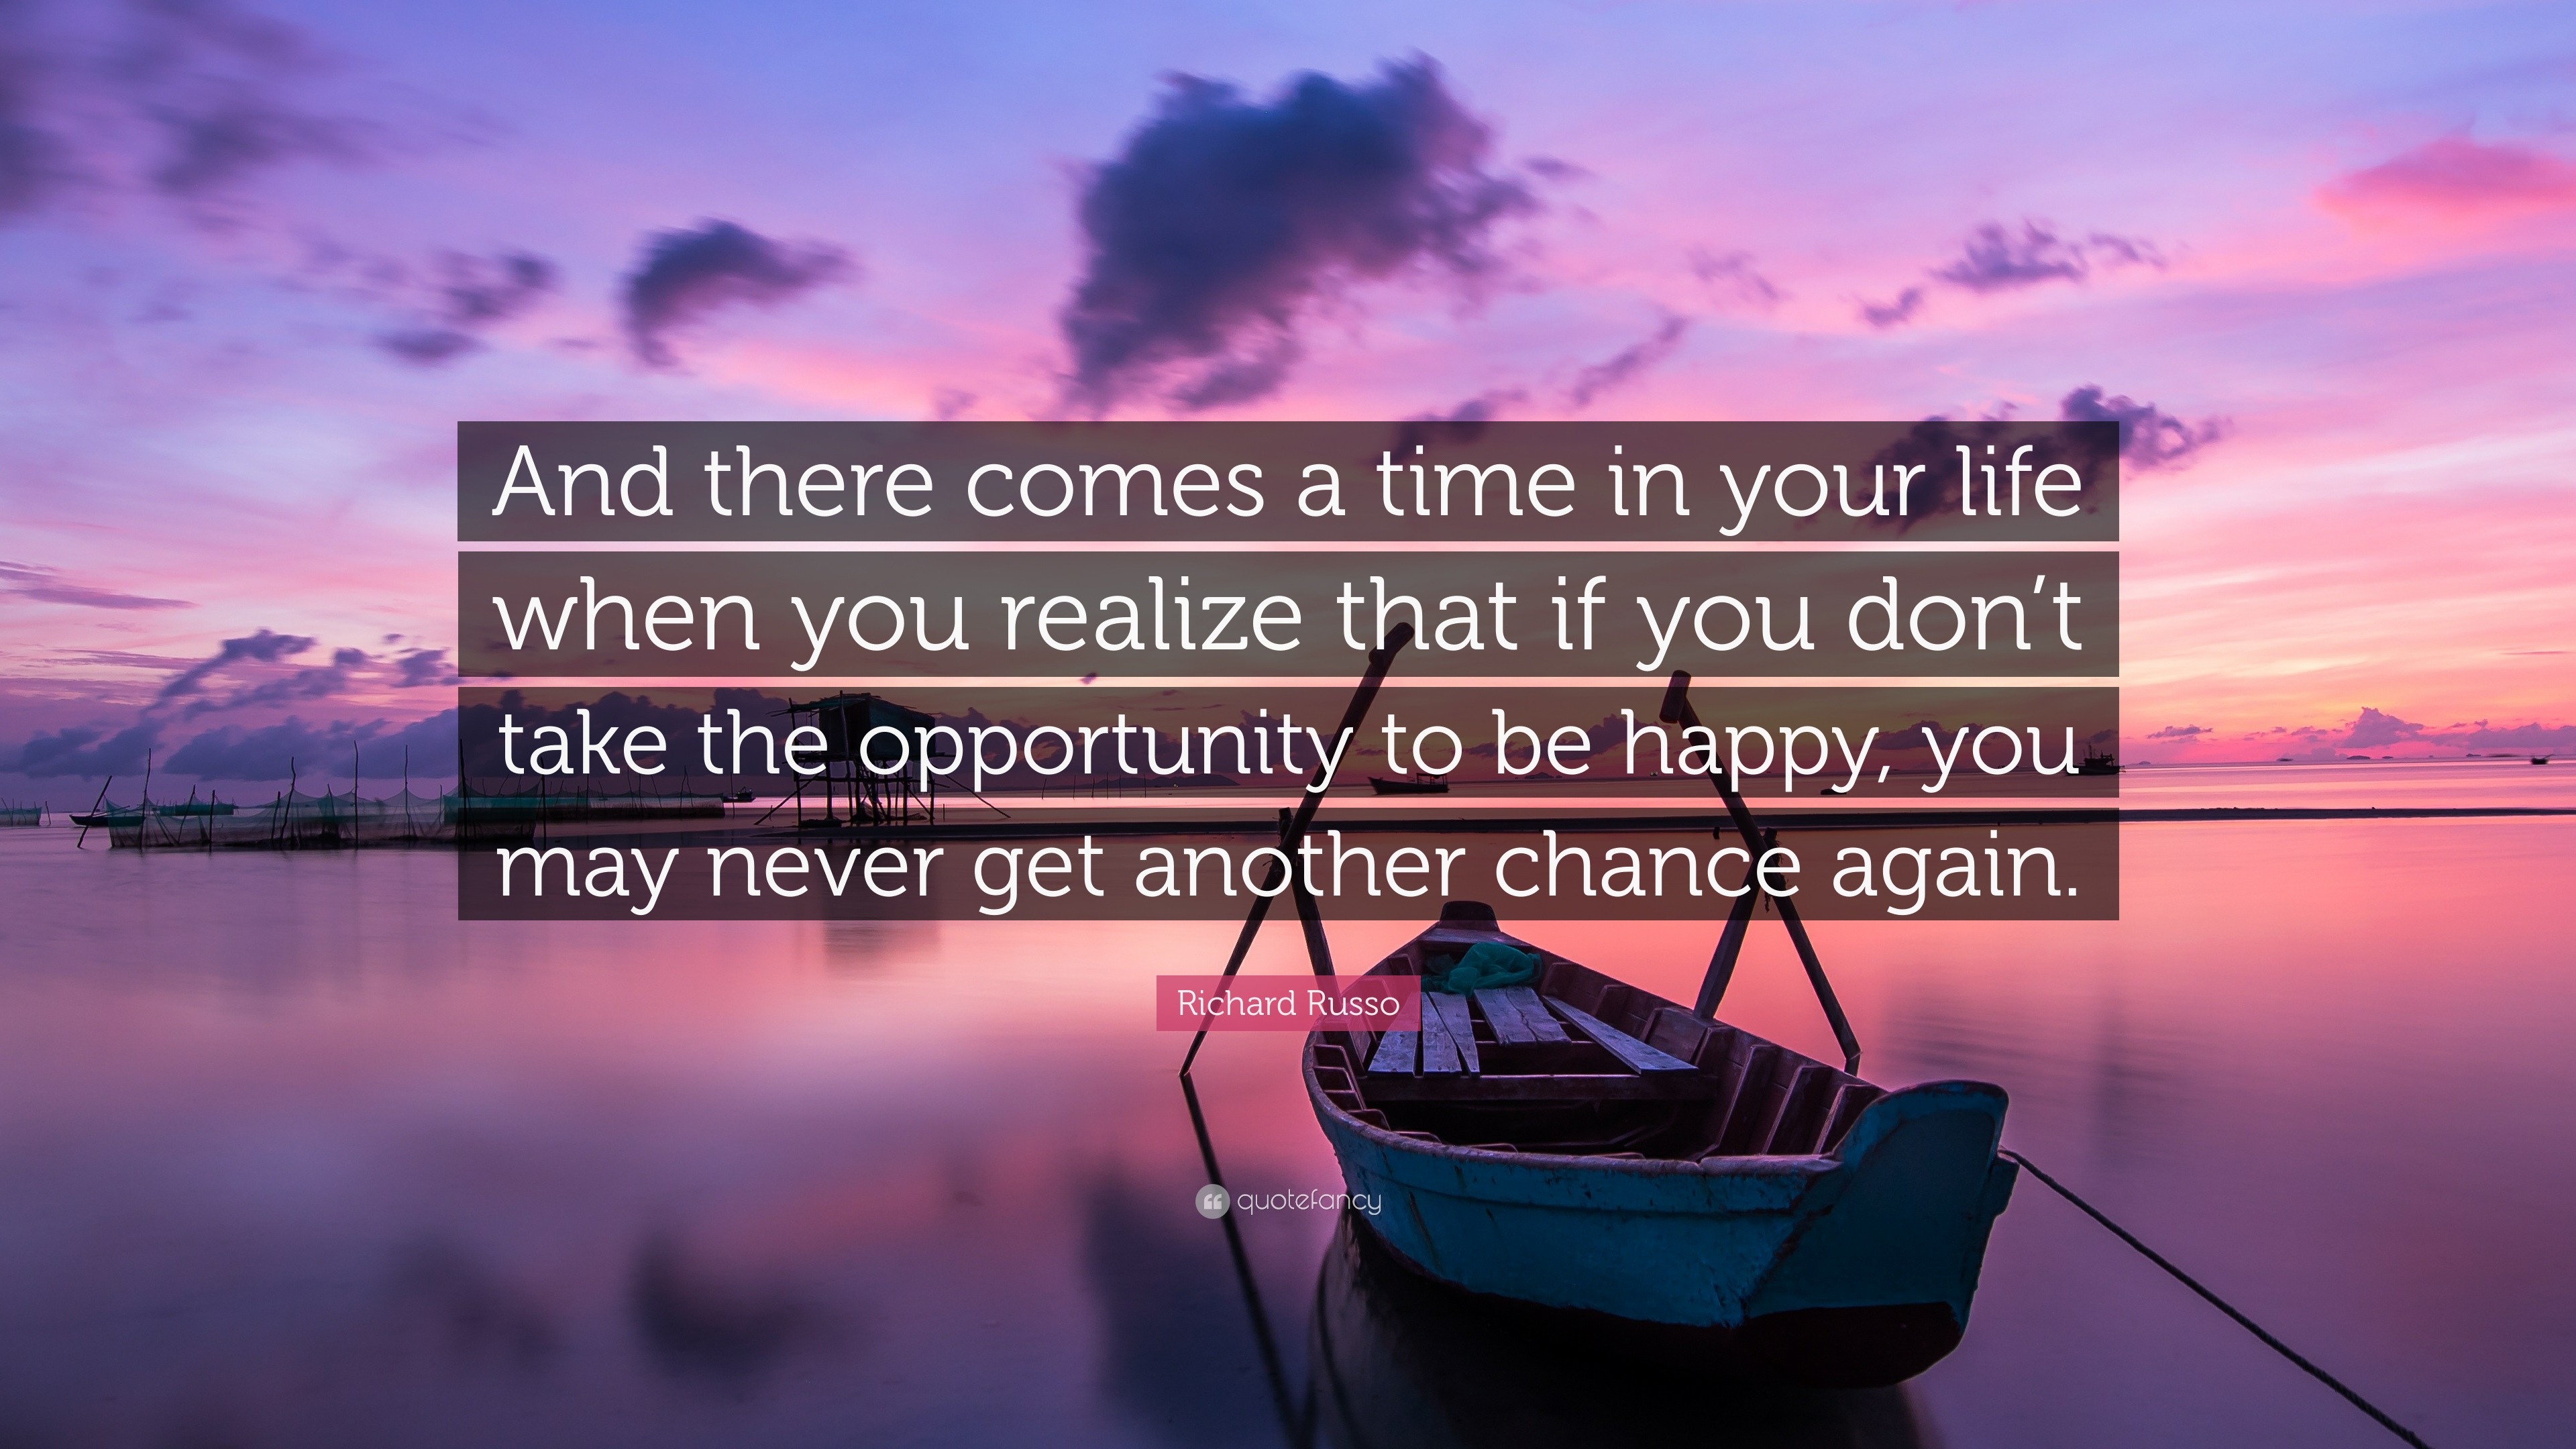 Richard Russo Quote: “And there comes a time in your life when you ...